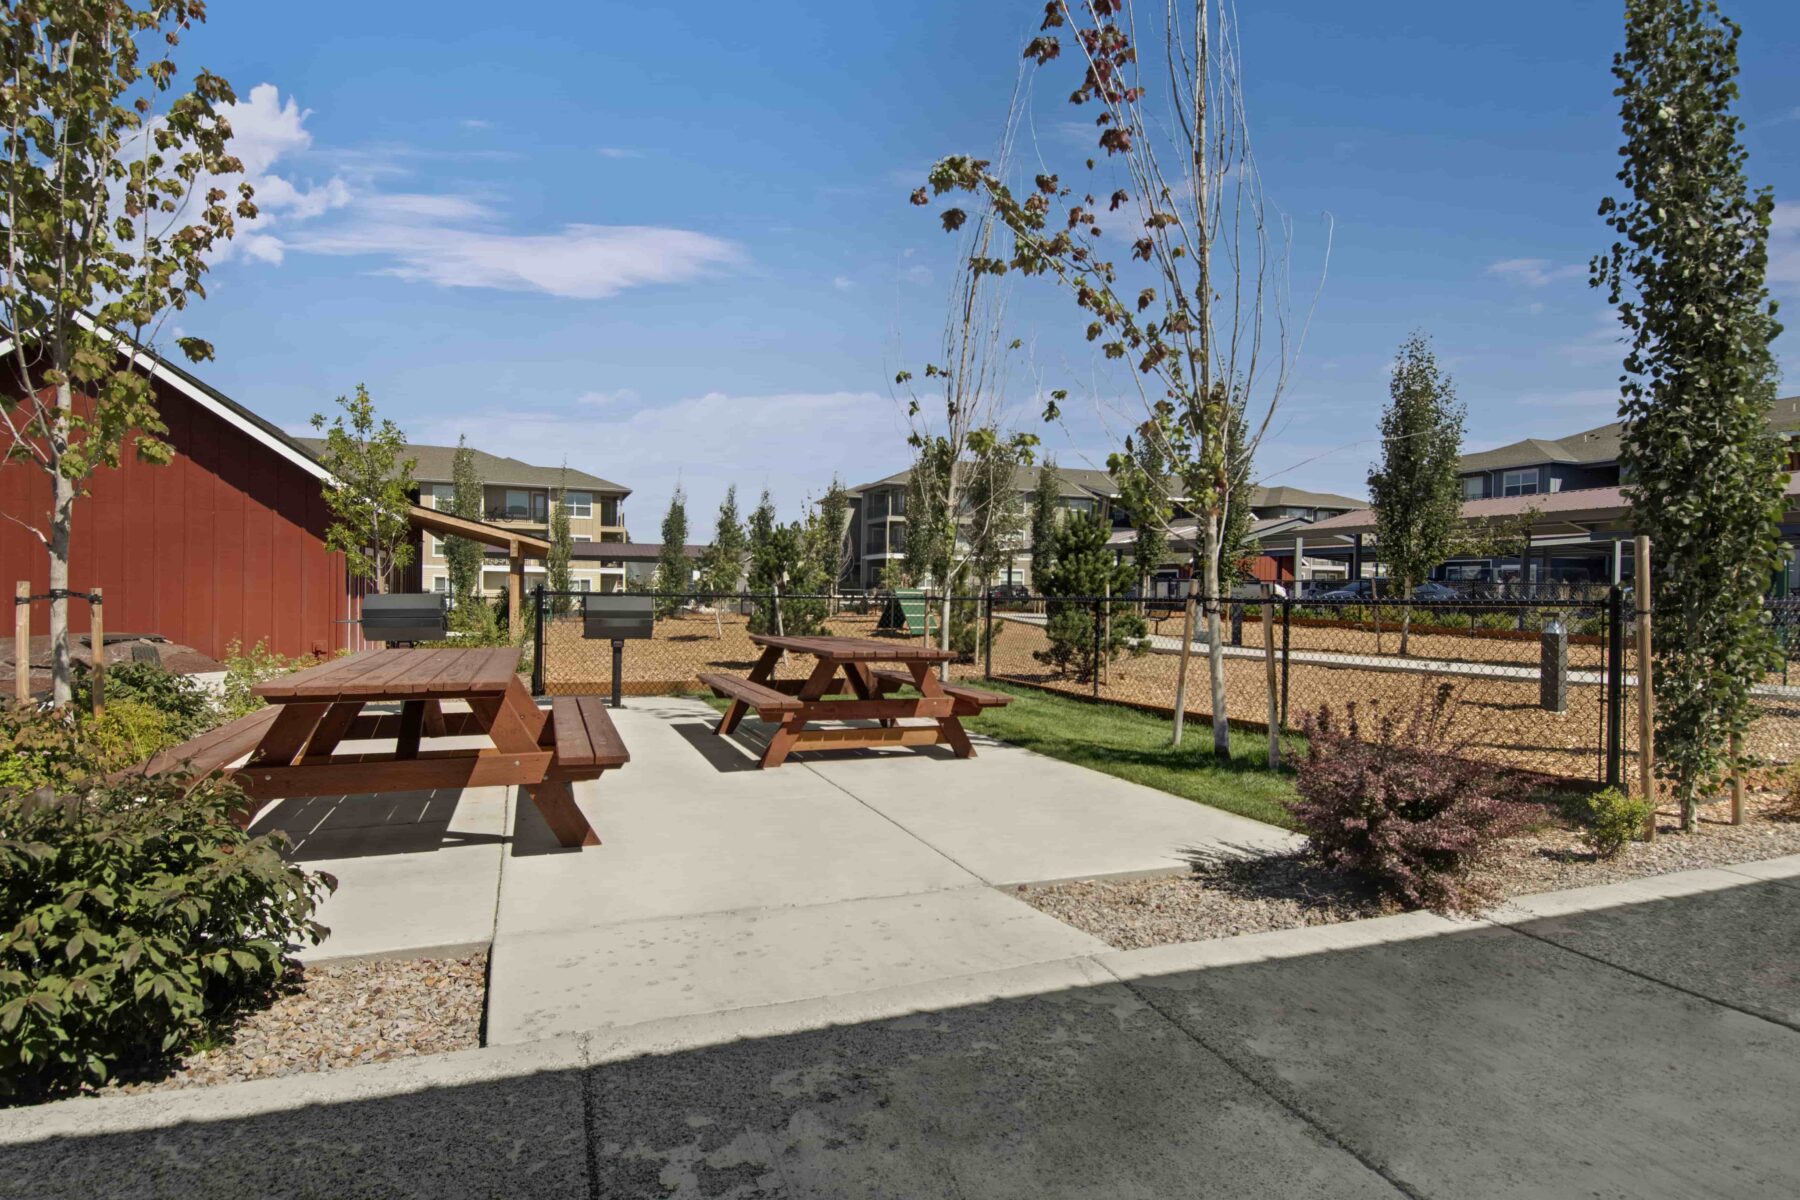 A sunny outdoor area with picnic tables and trees, located beside dog park with houses in the background.